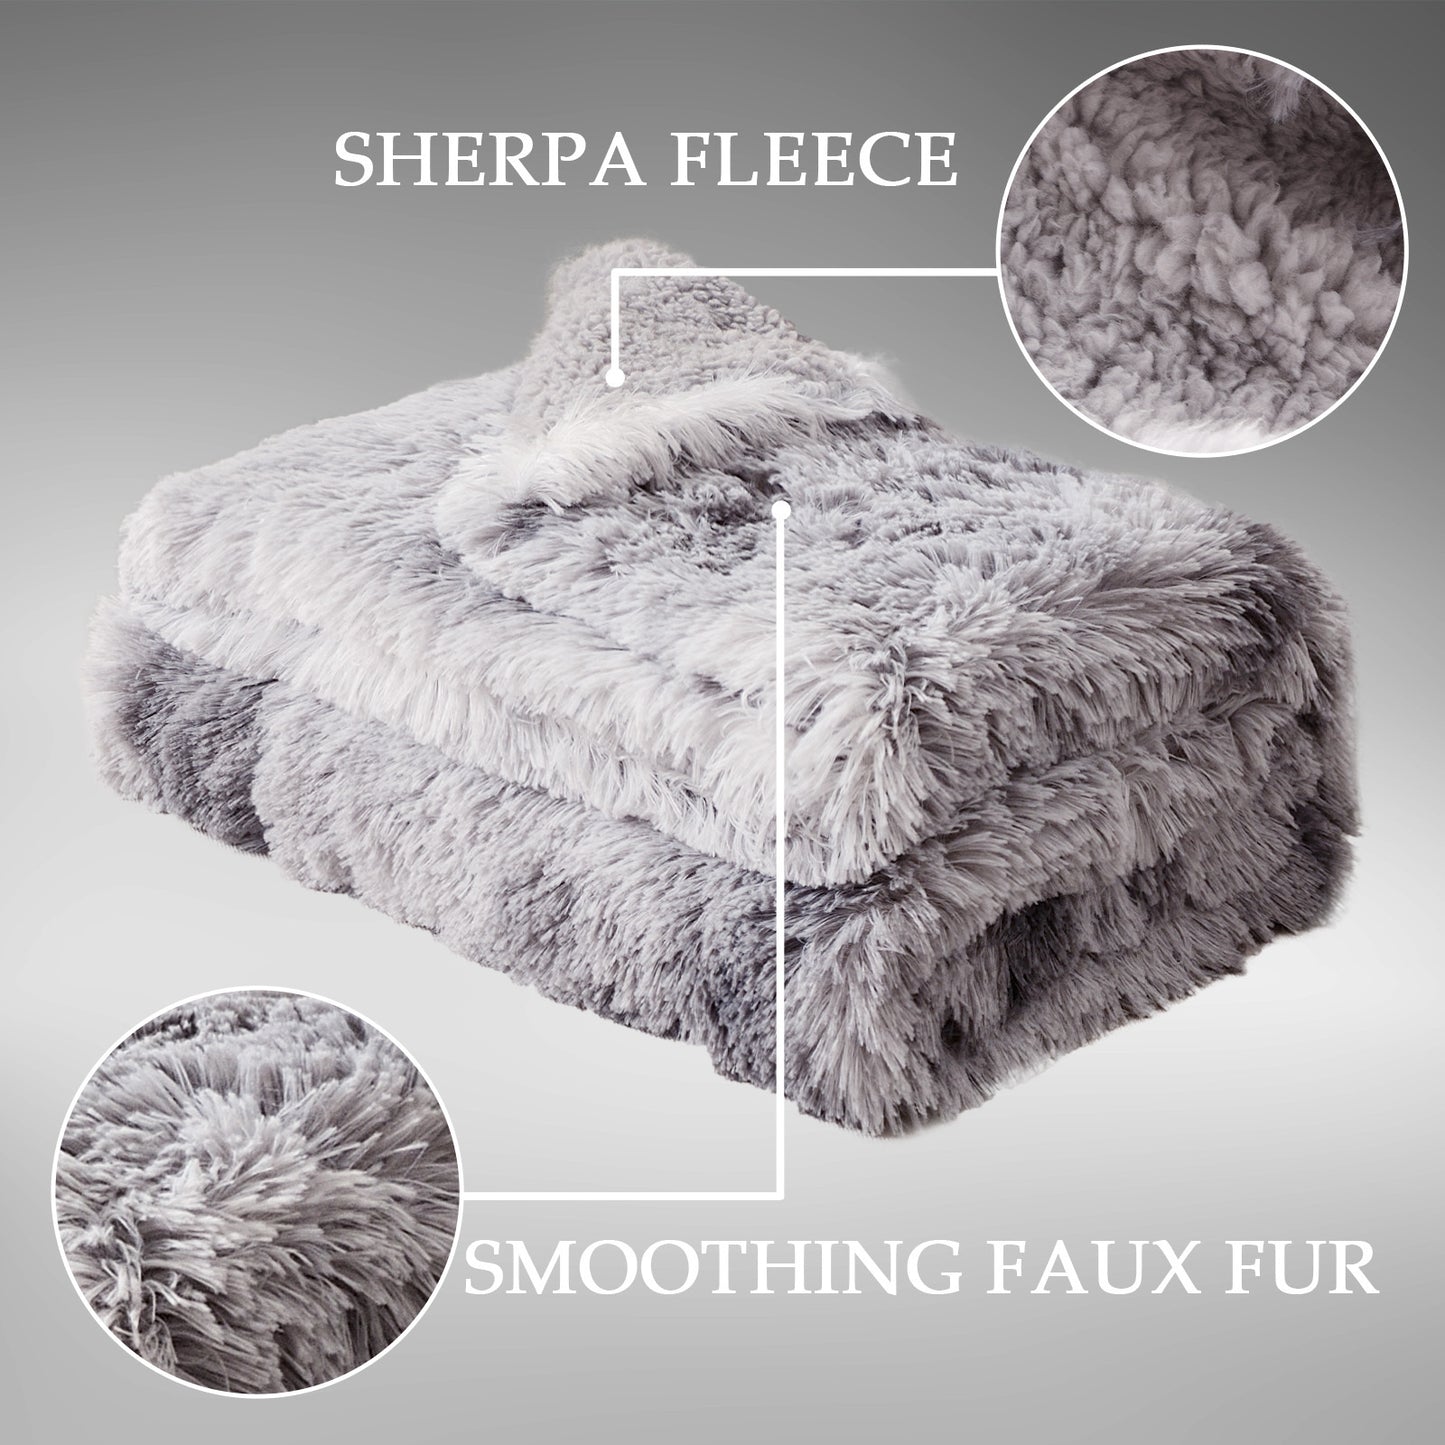 Exclusivo Mezcla King Size Faux Fur Bed Blanket, Super Soft Fuzzy and Plush Reversible Sherpa Fleece Blanket and Warm Blankets for Bed, Sofa, Travel, 90X104 inches, Dark Grey